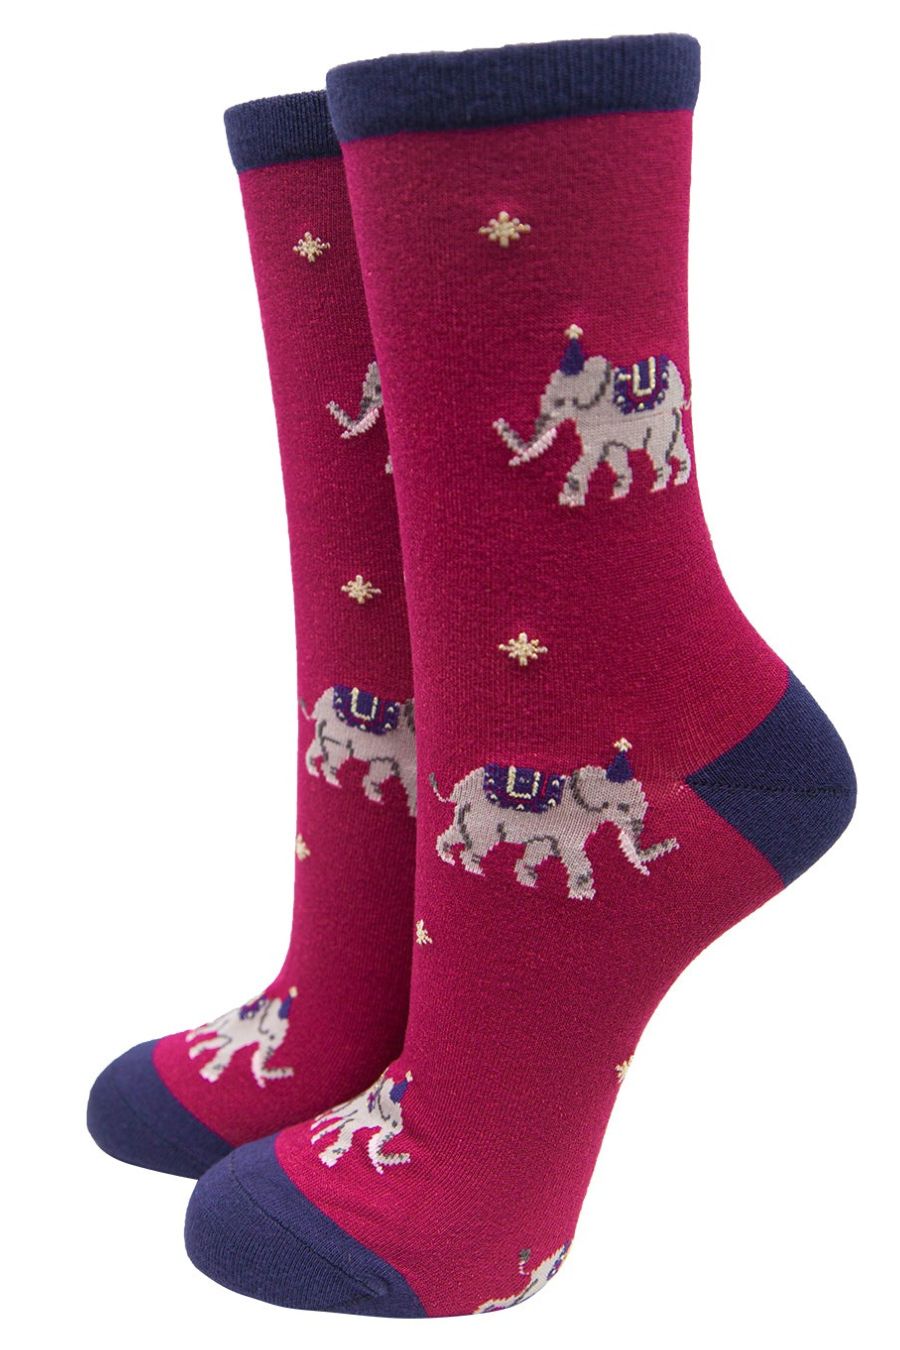 pink and navy blue ankle socks featuring elephands wearing party hats